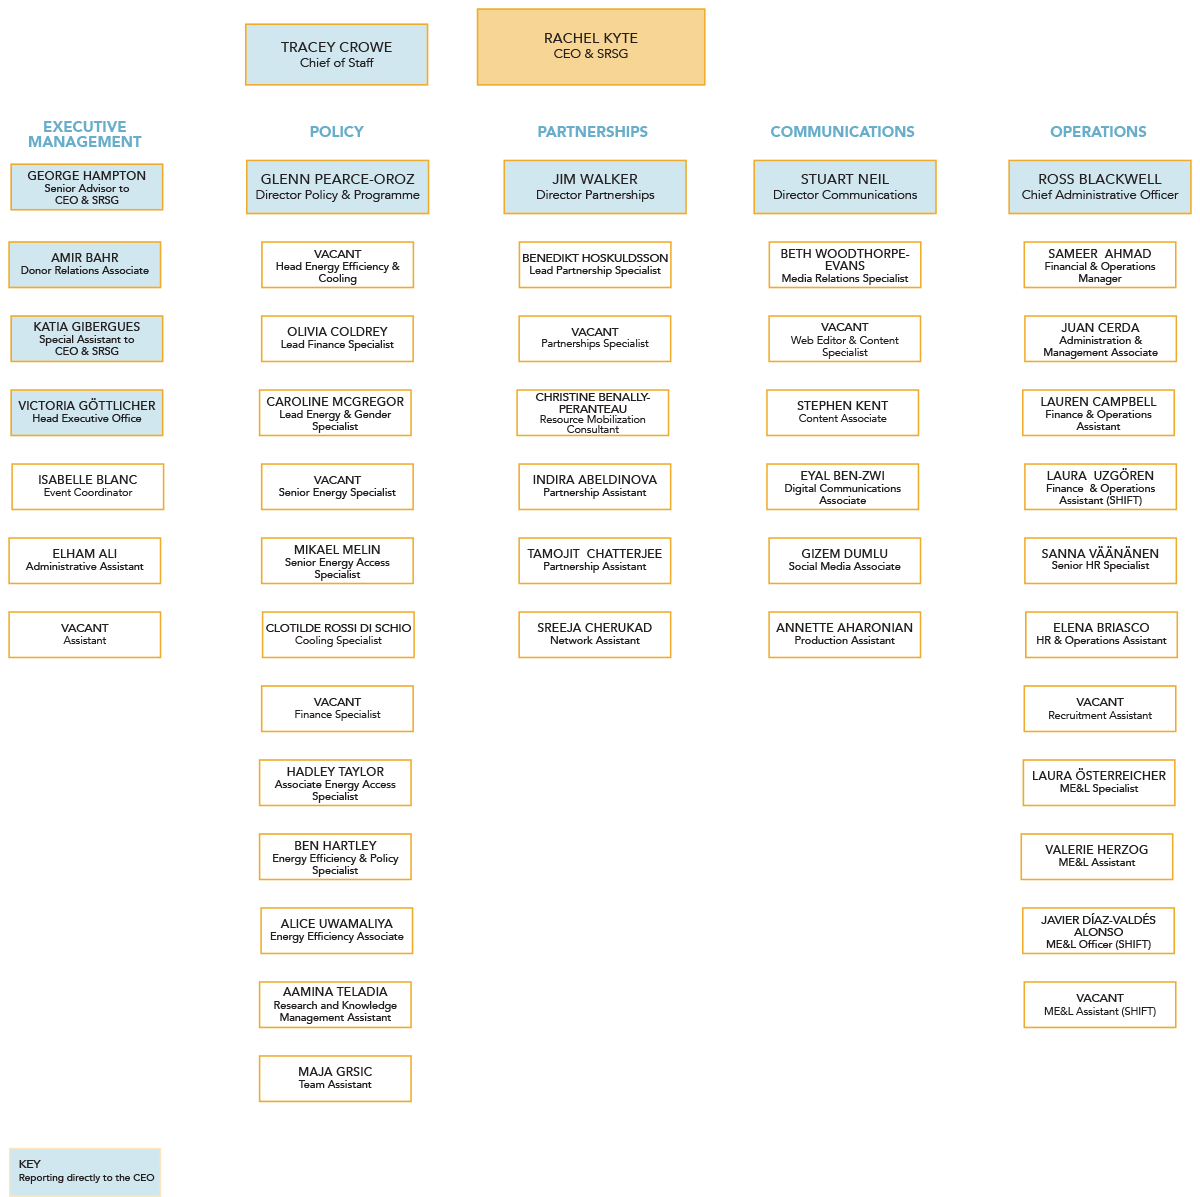 United Nations Hierarchy Chart